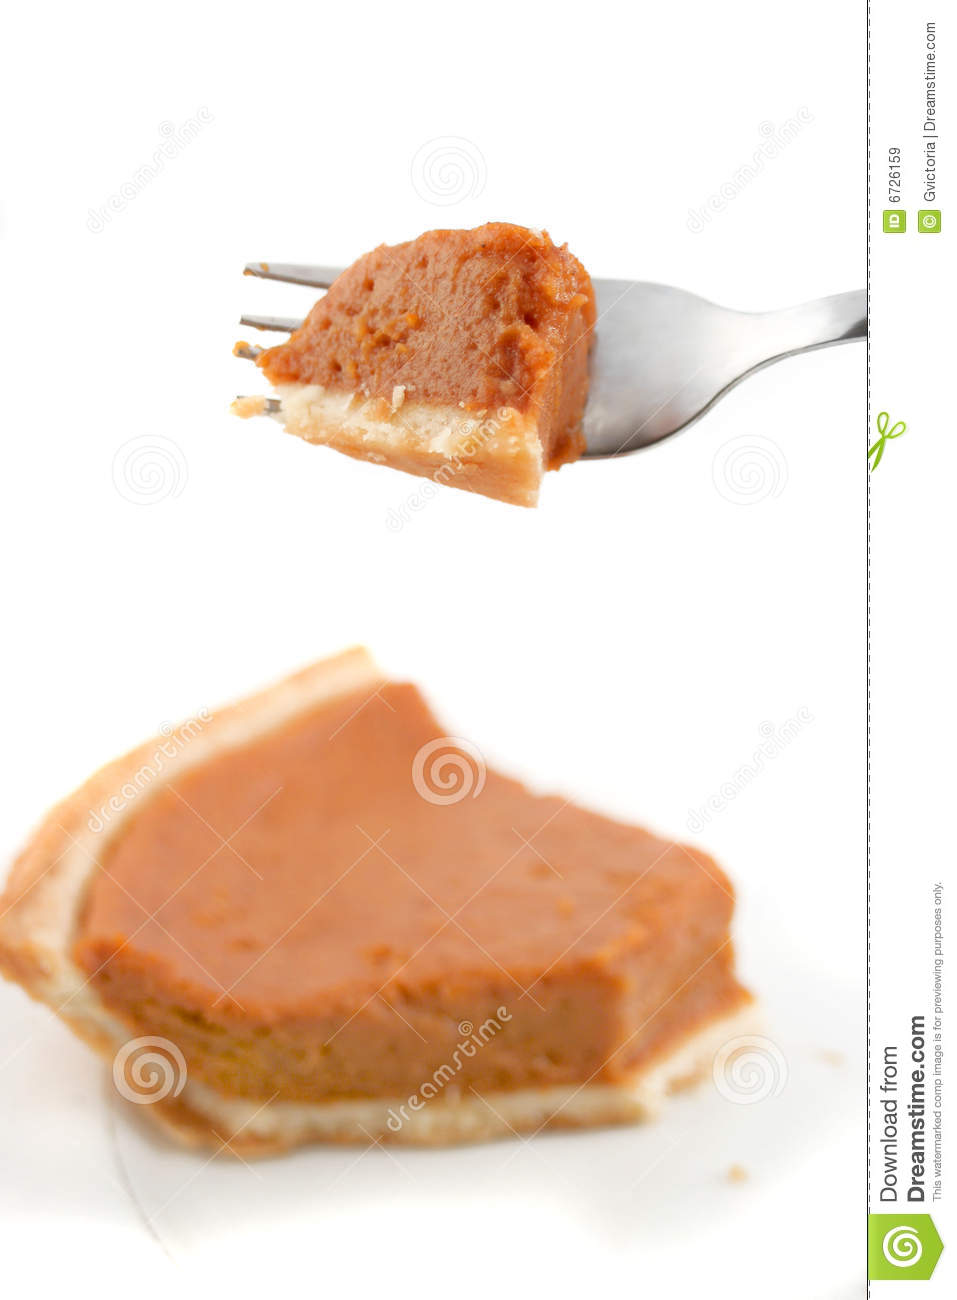 Eating Pumpkin Pie Royalty Free Stock Images   Image  6726159